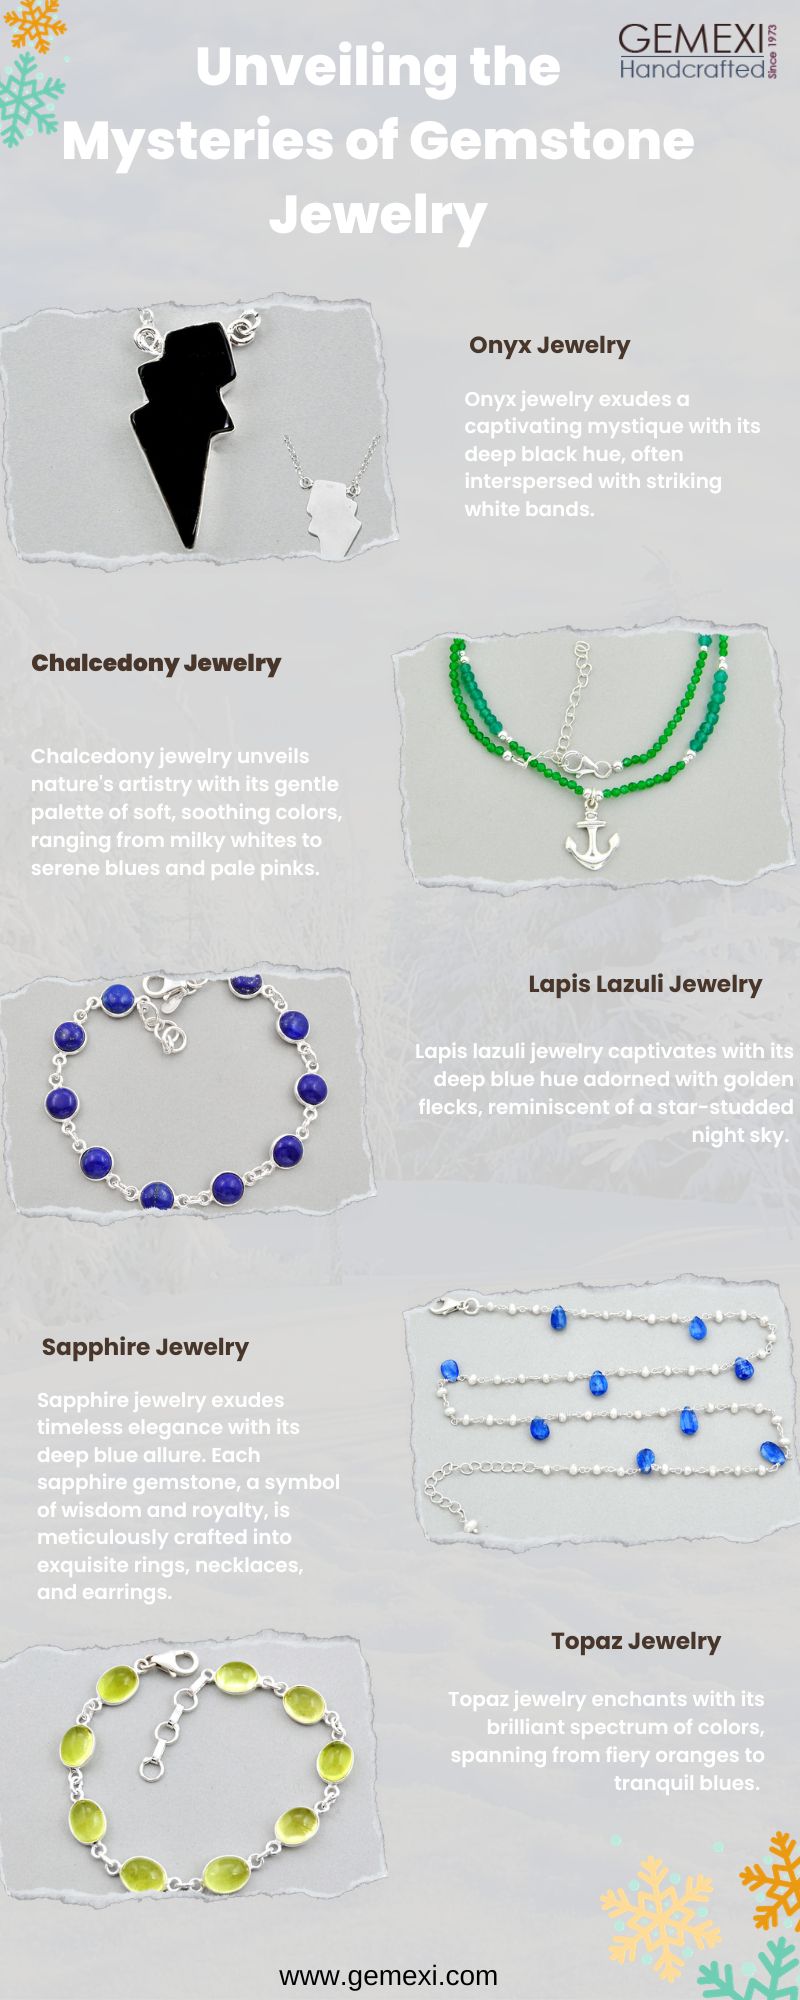 Gemexi: Unveiling the Mysteries of Gemstone Jewelry